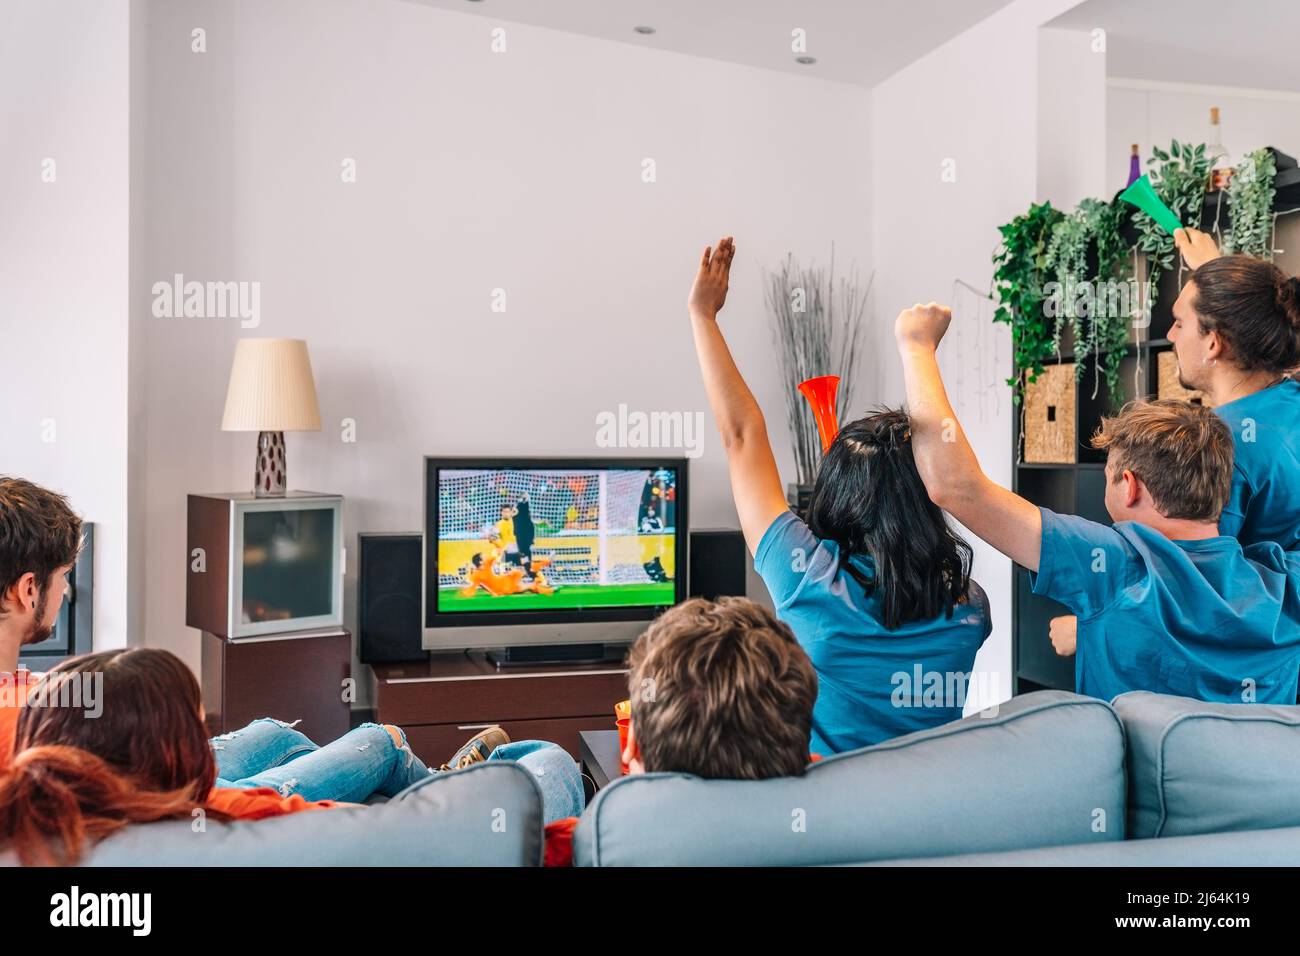 young friends celebrating their team's victory. young friends sad after their team's defeat. watching football on TV. Stock Photo